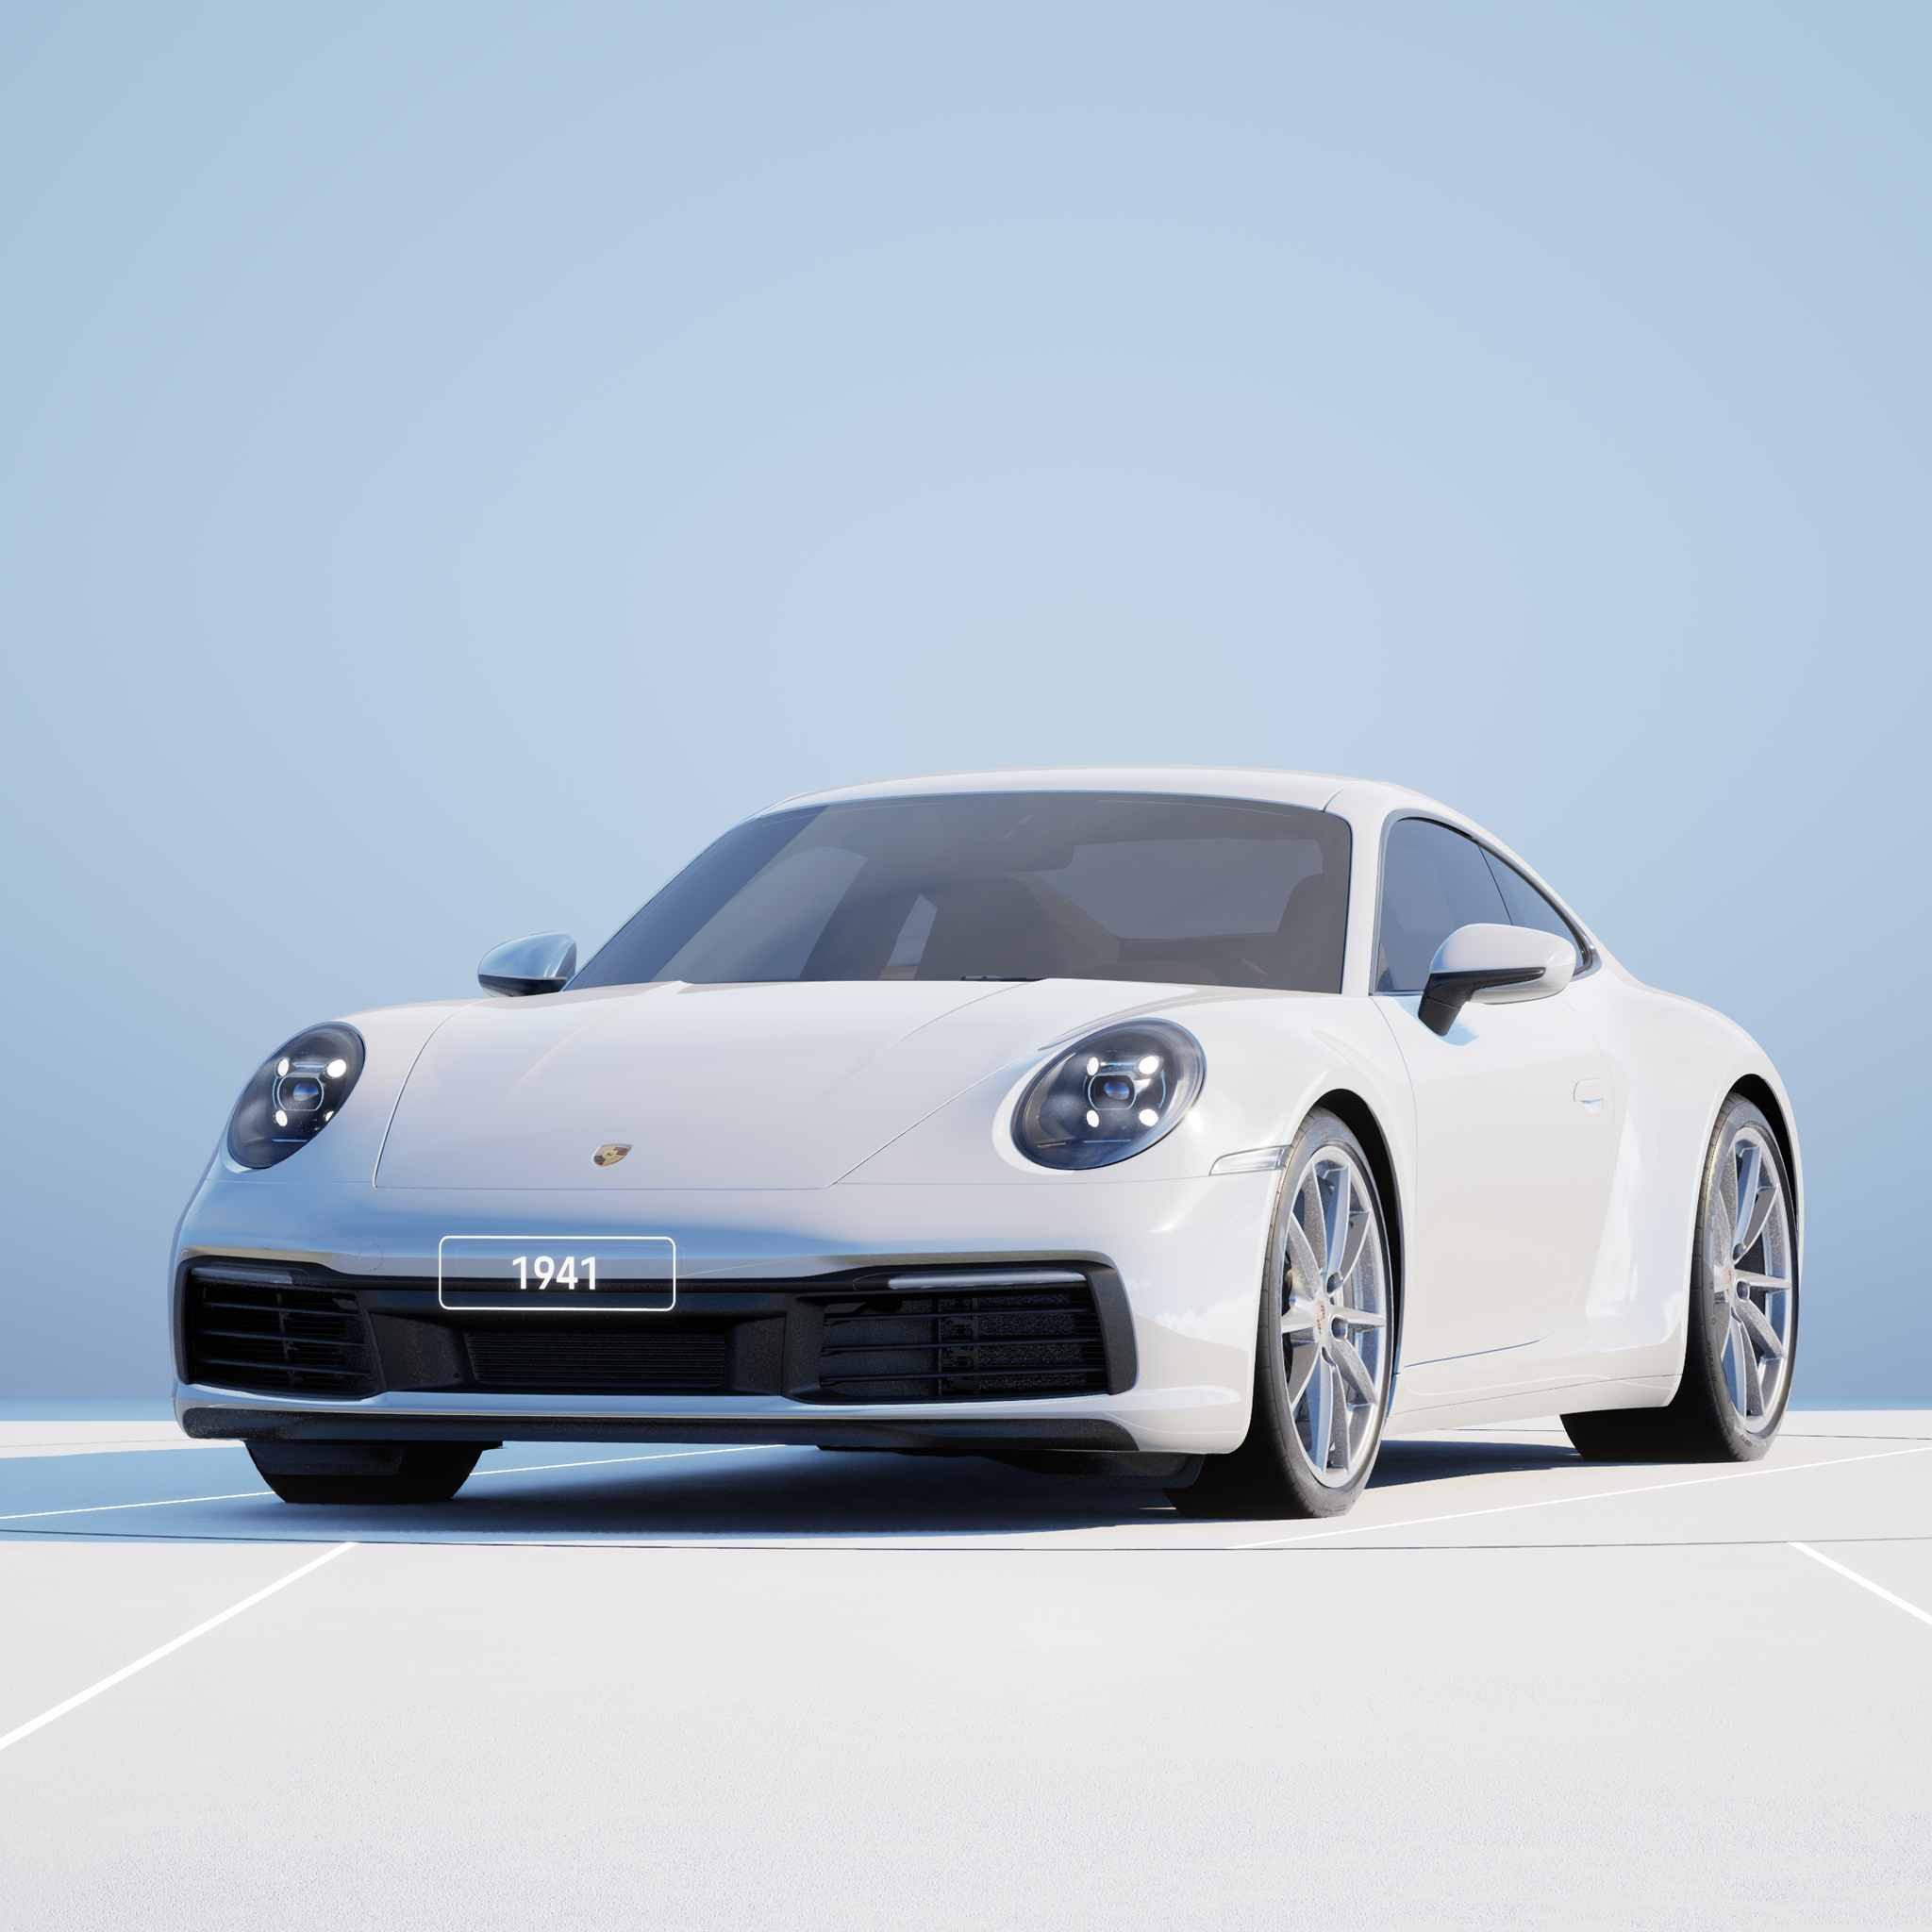 The PORSCHΞ 911 1941 image in phase